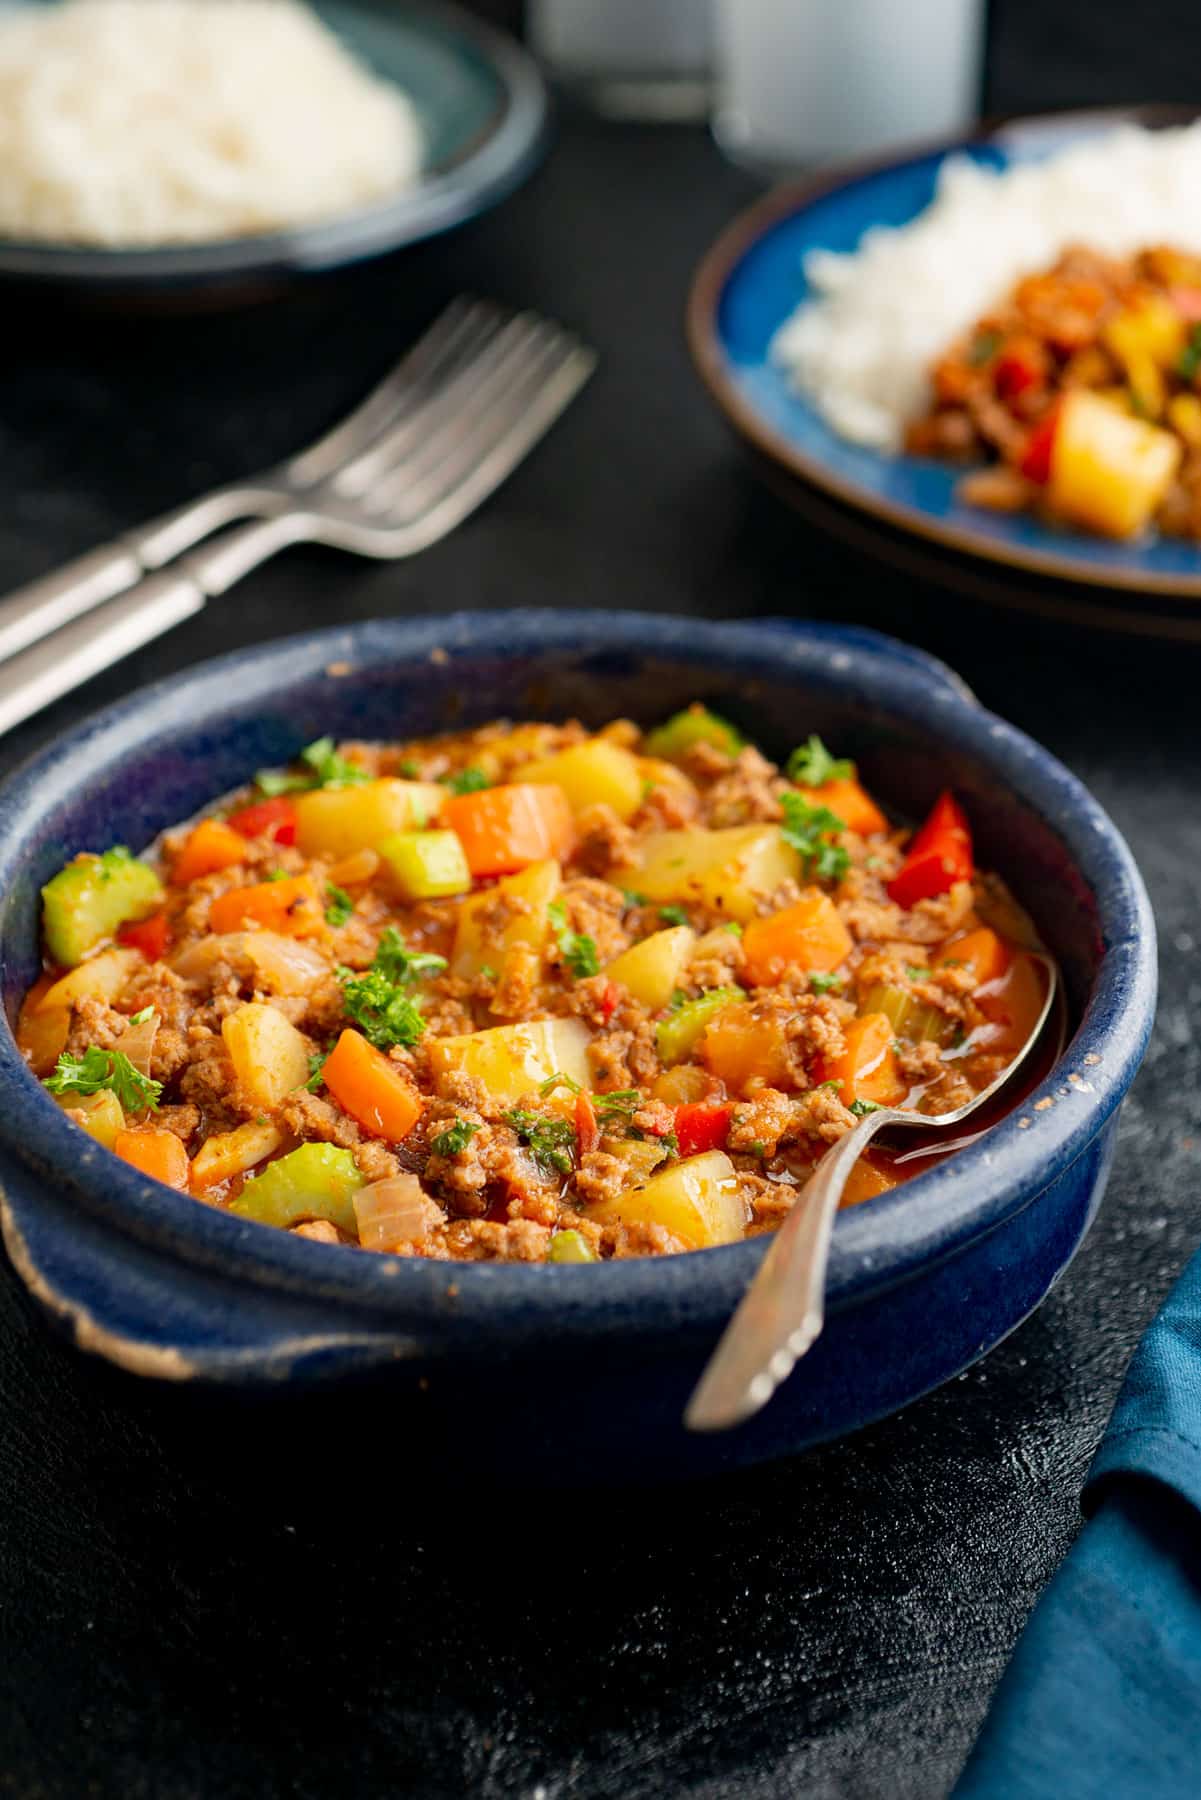 Beef picadillo with potato and carrot.